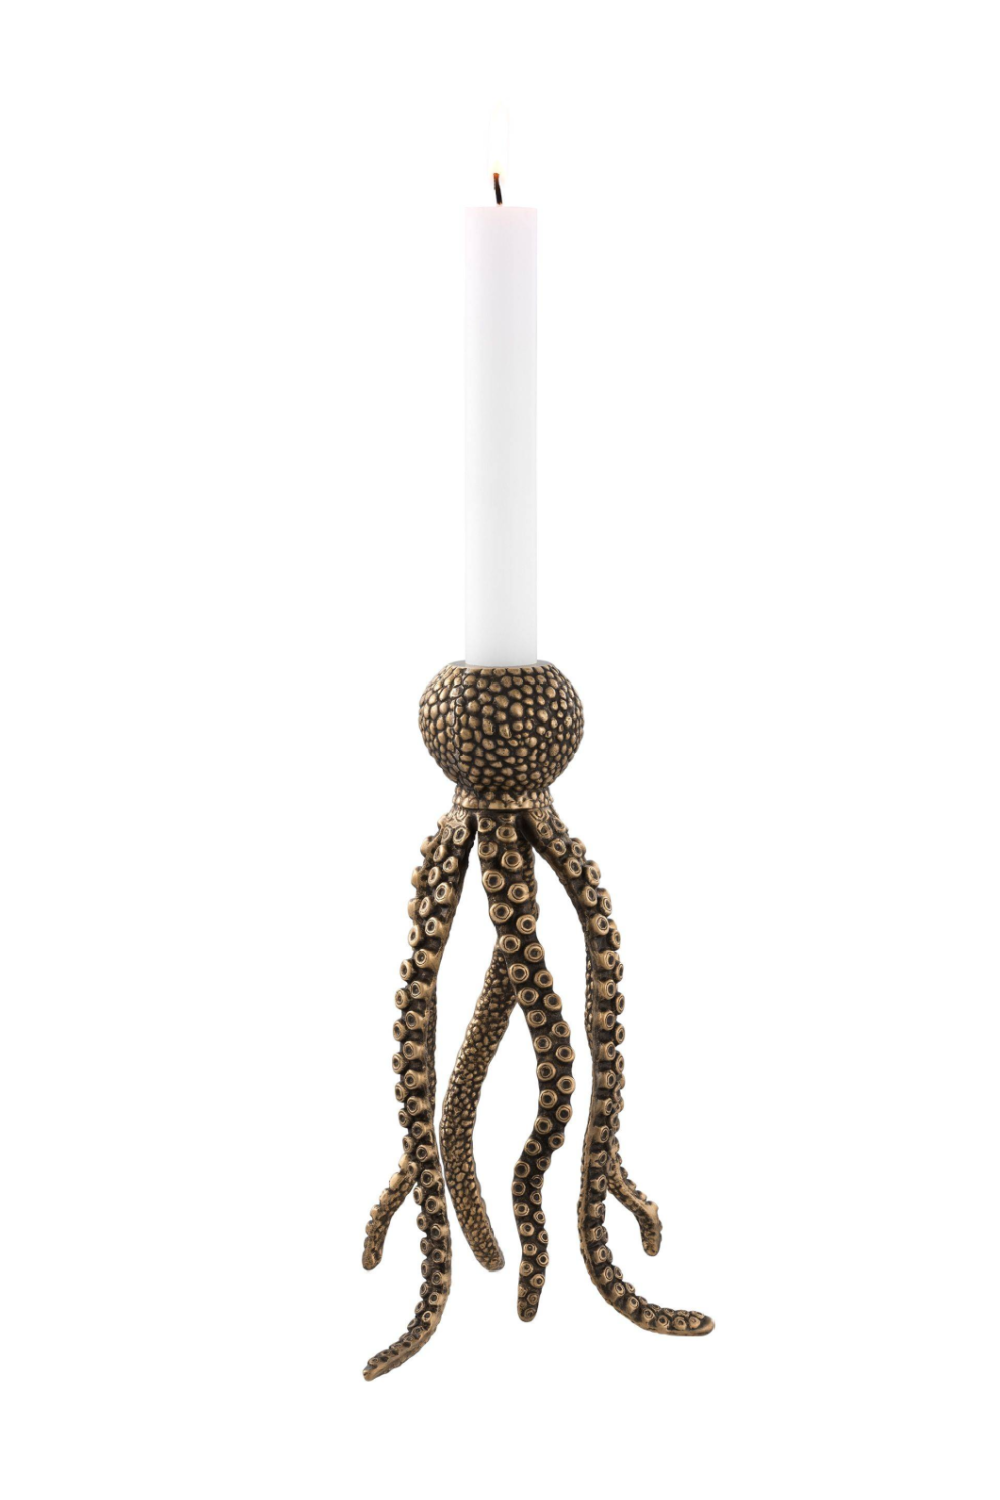 Tentacle Candle Holder | Eichholtz Octopus | OROA